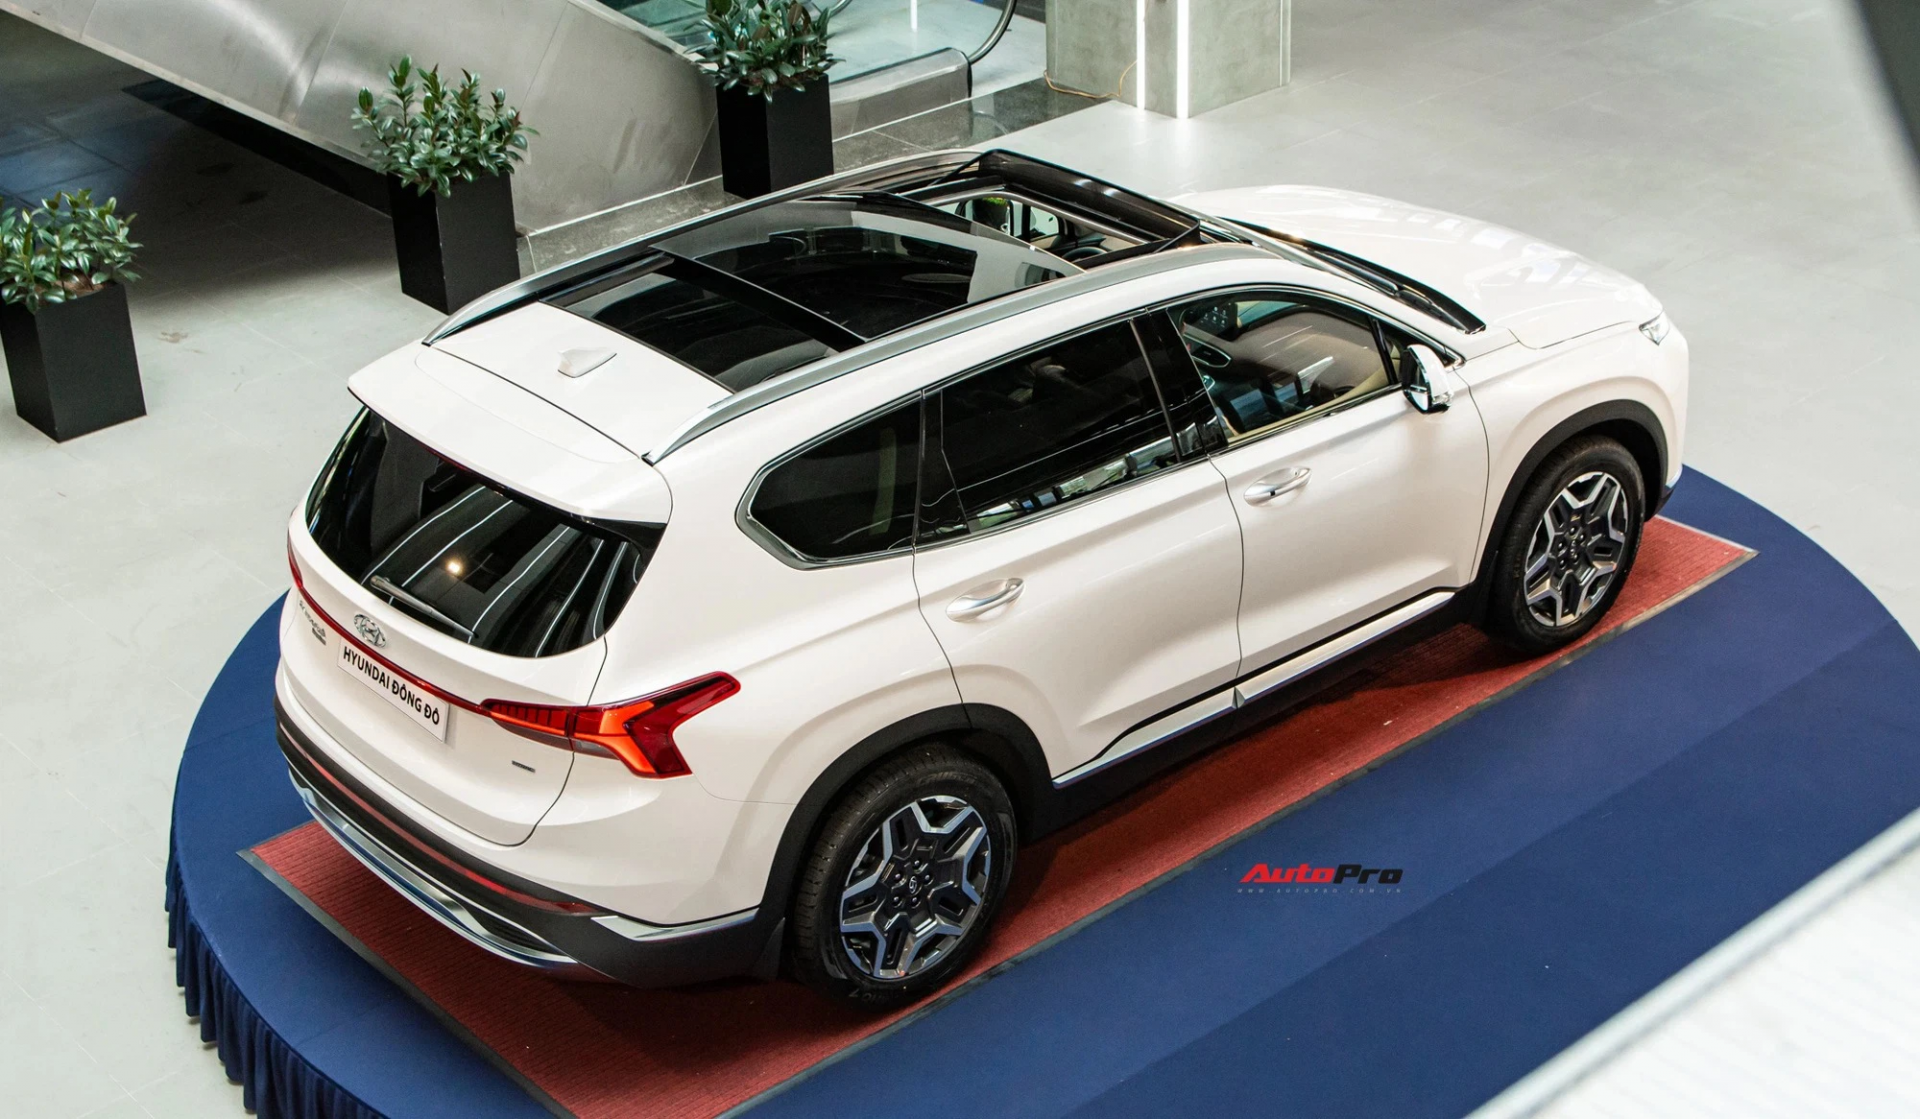 Hyundai Santa Fe 2022 suddenly appeared at the dealer: Surprised about the selling price 2